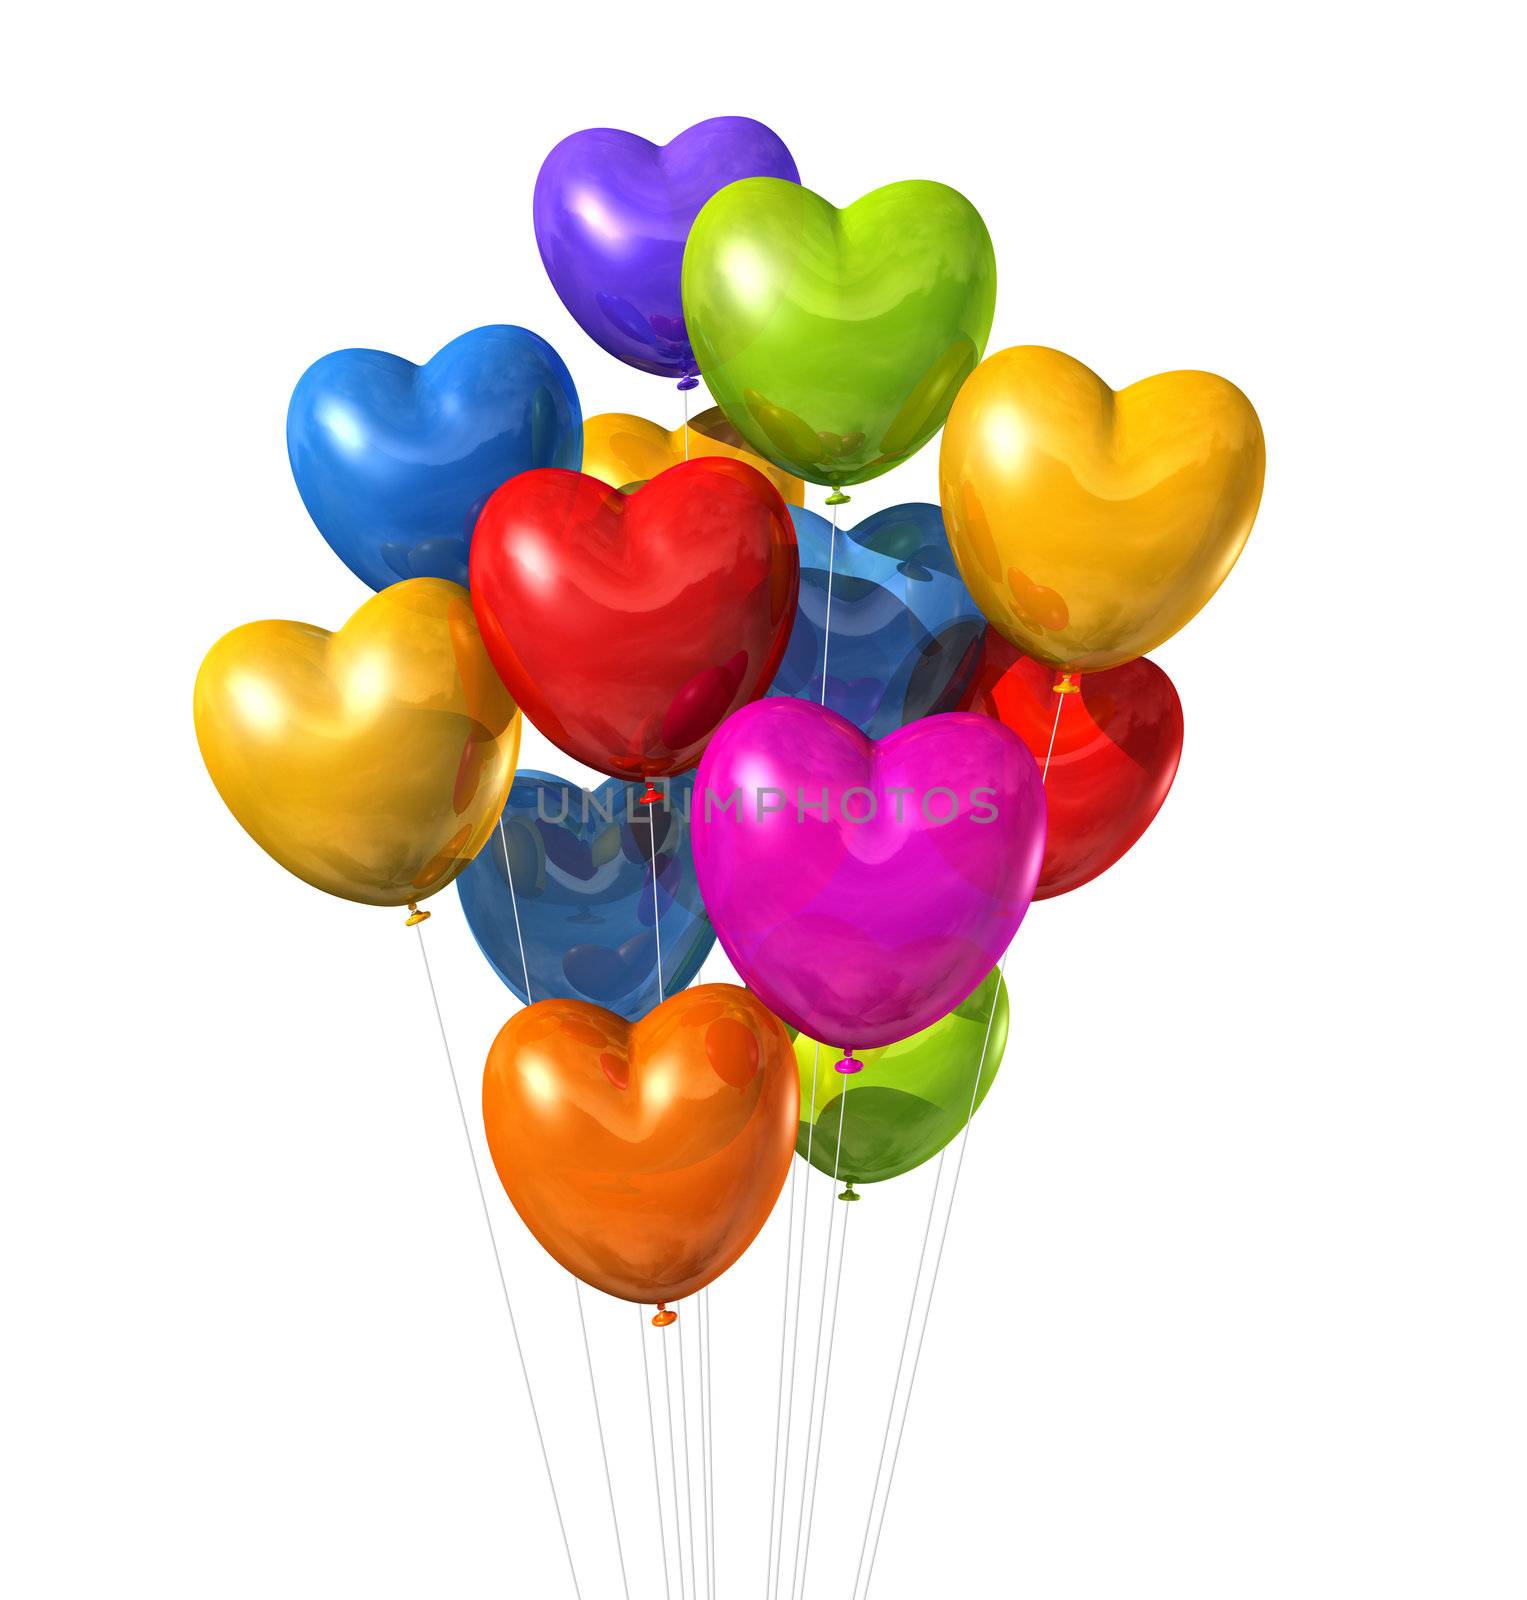 3D colored heart shape balloons isolated on white